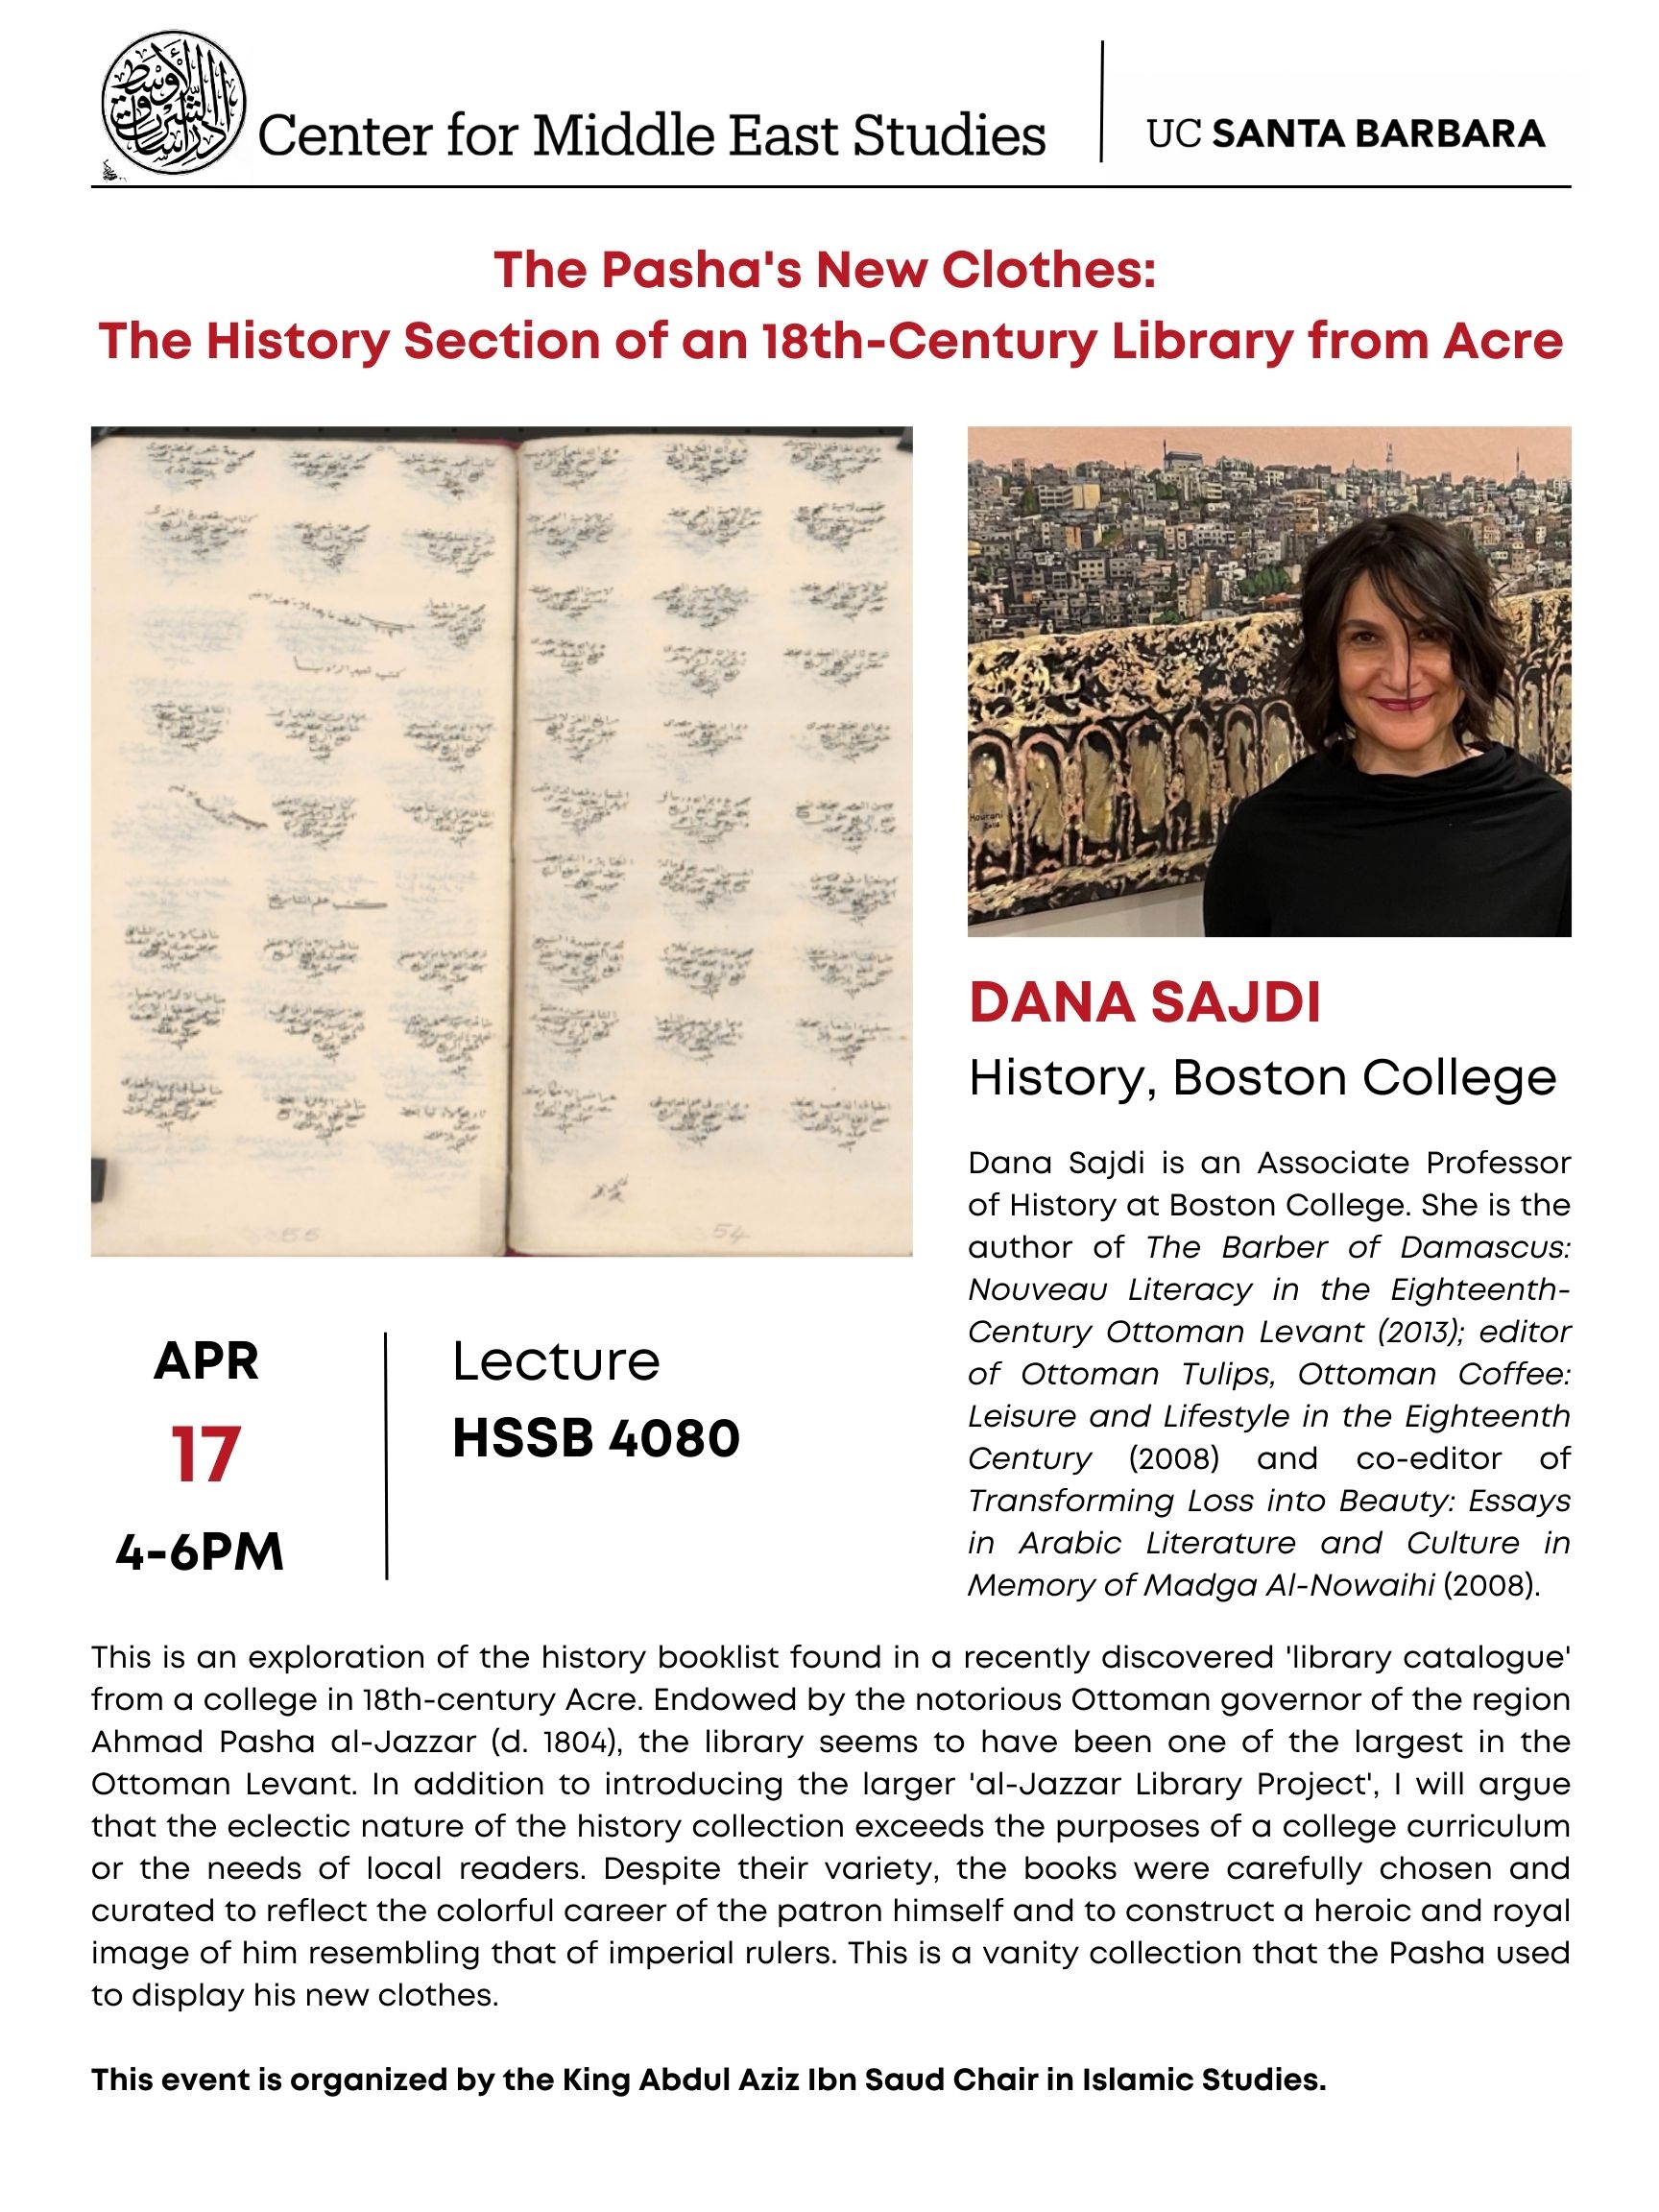 Flyer for "The Pasha's New Clothes: The History Section of an 18th-Century Library from Acre" on April 17 from 4-6PM in HSSB 4080